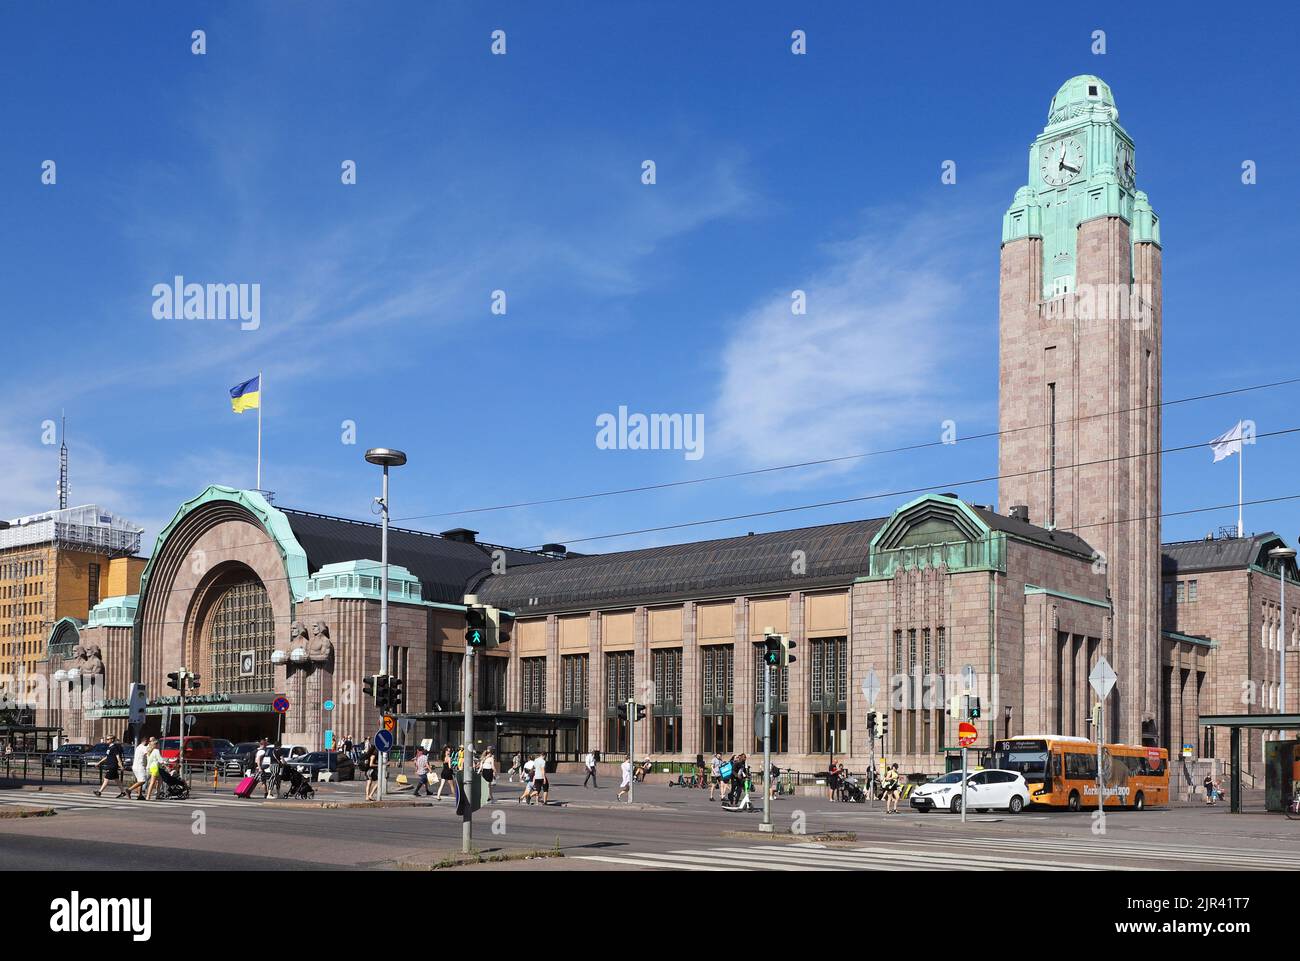 Helsinki, Finland - August 20, 2022: Exterior view of the Helsinki central railroad station building. Stock Photo